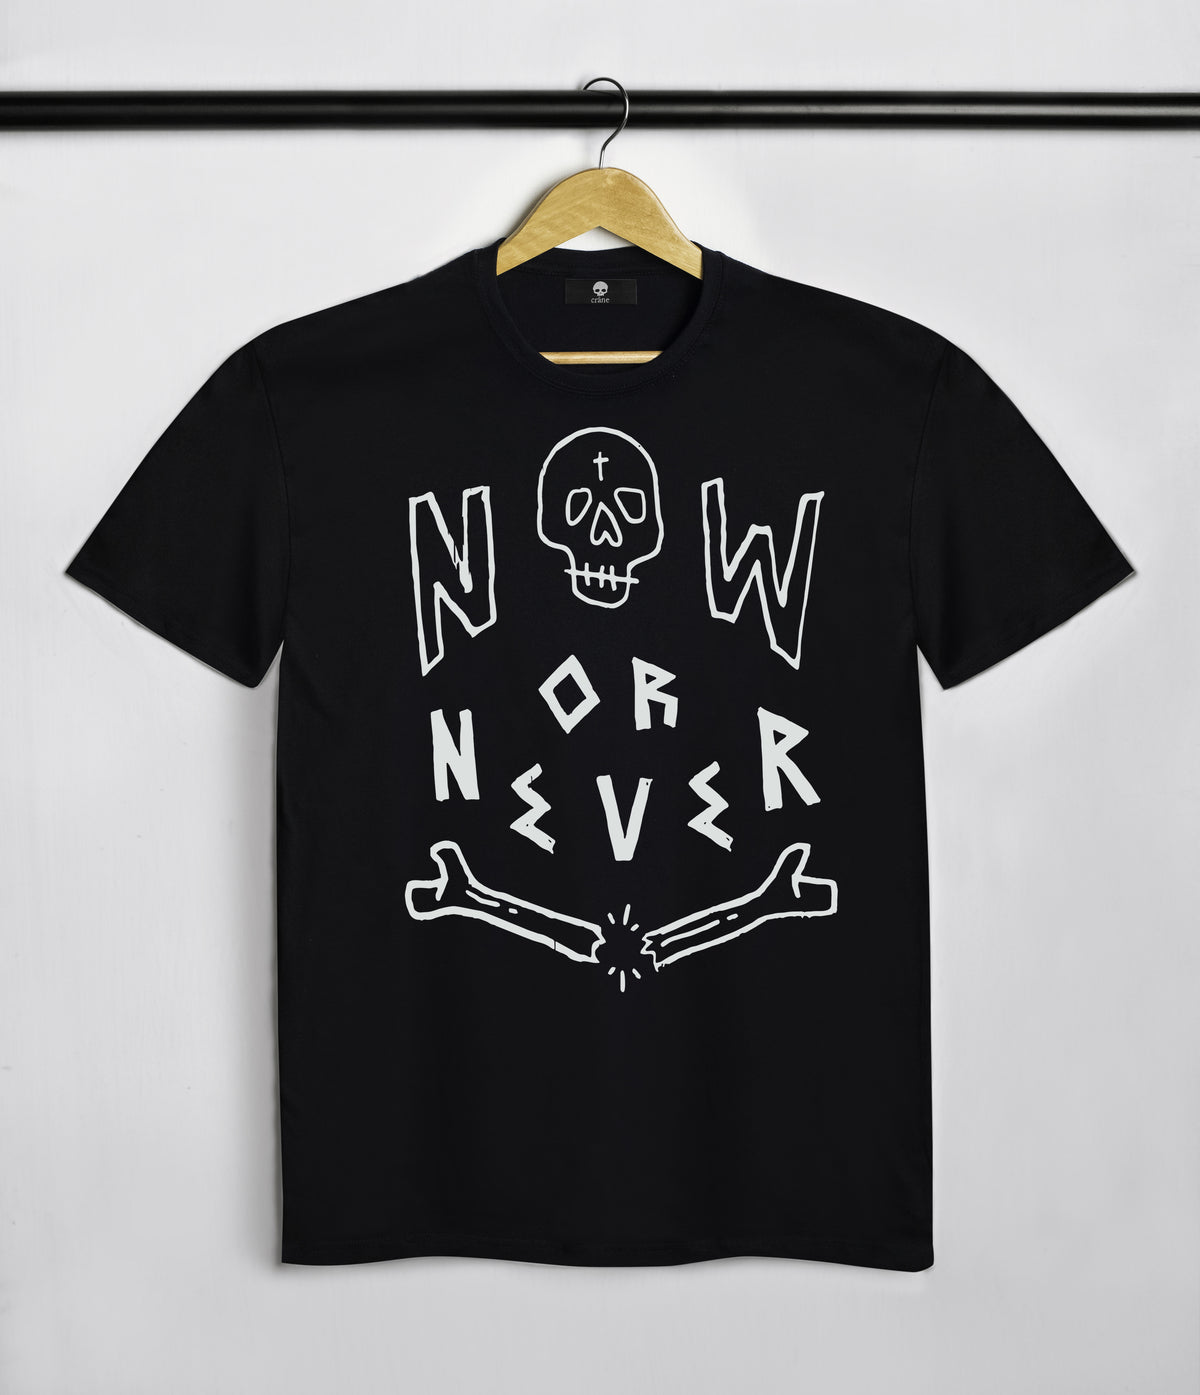 Now or never Negra